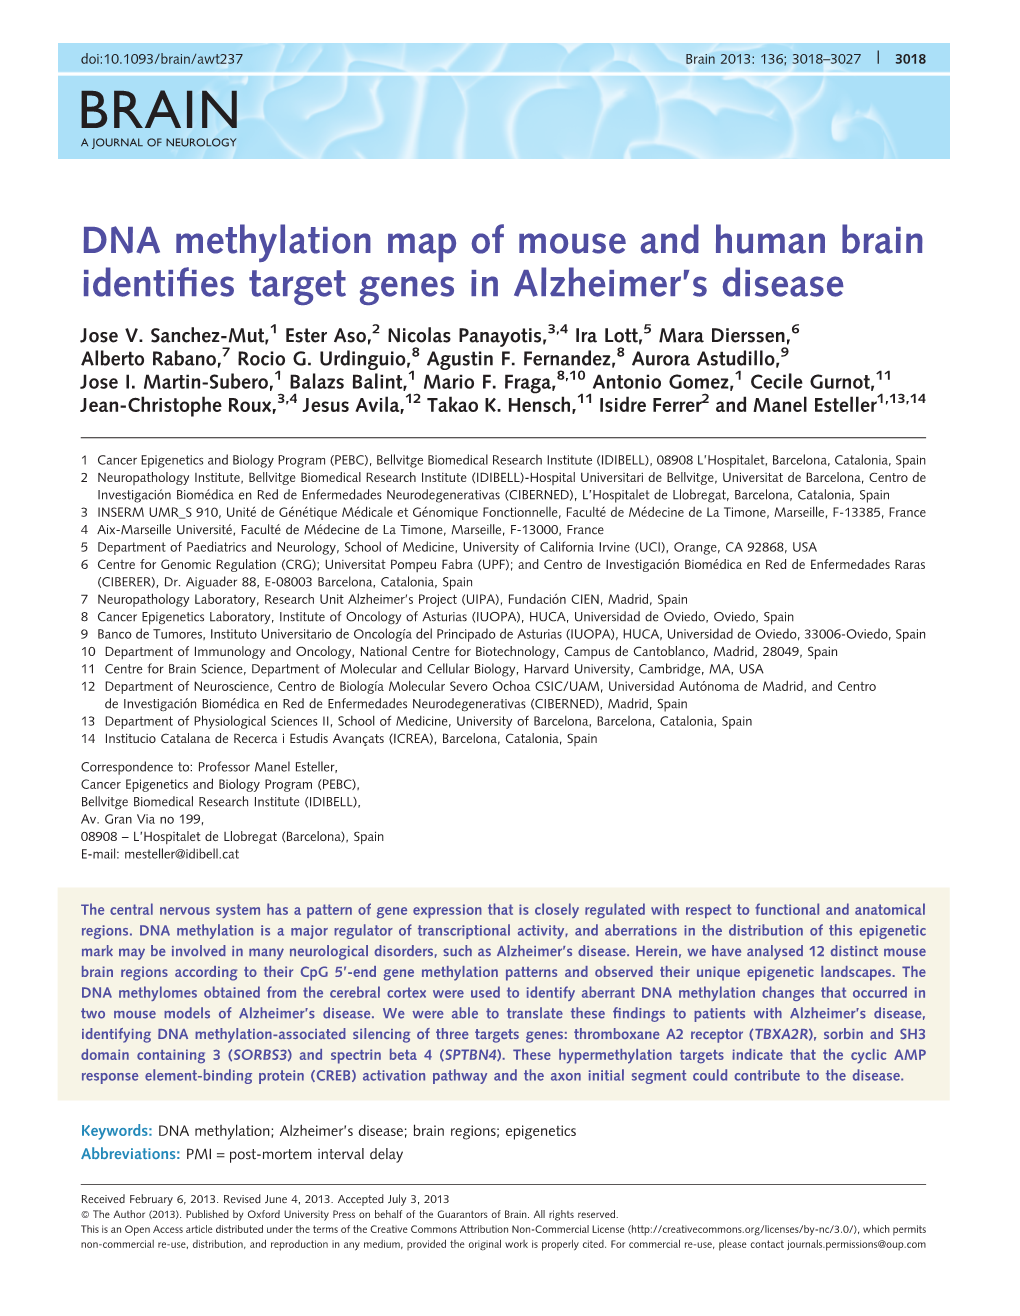 DNA Methylation Map of Mouse and Human Brain Identifies Target Genes in Alzheimer's Disease